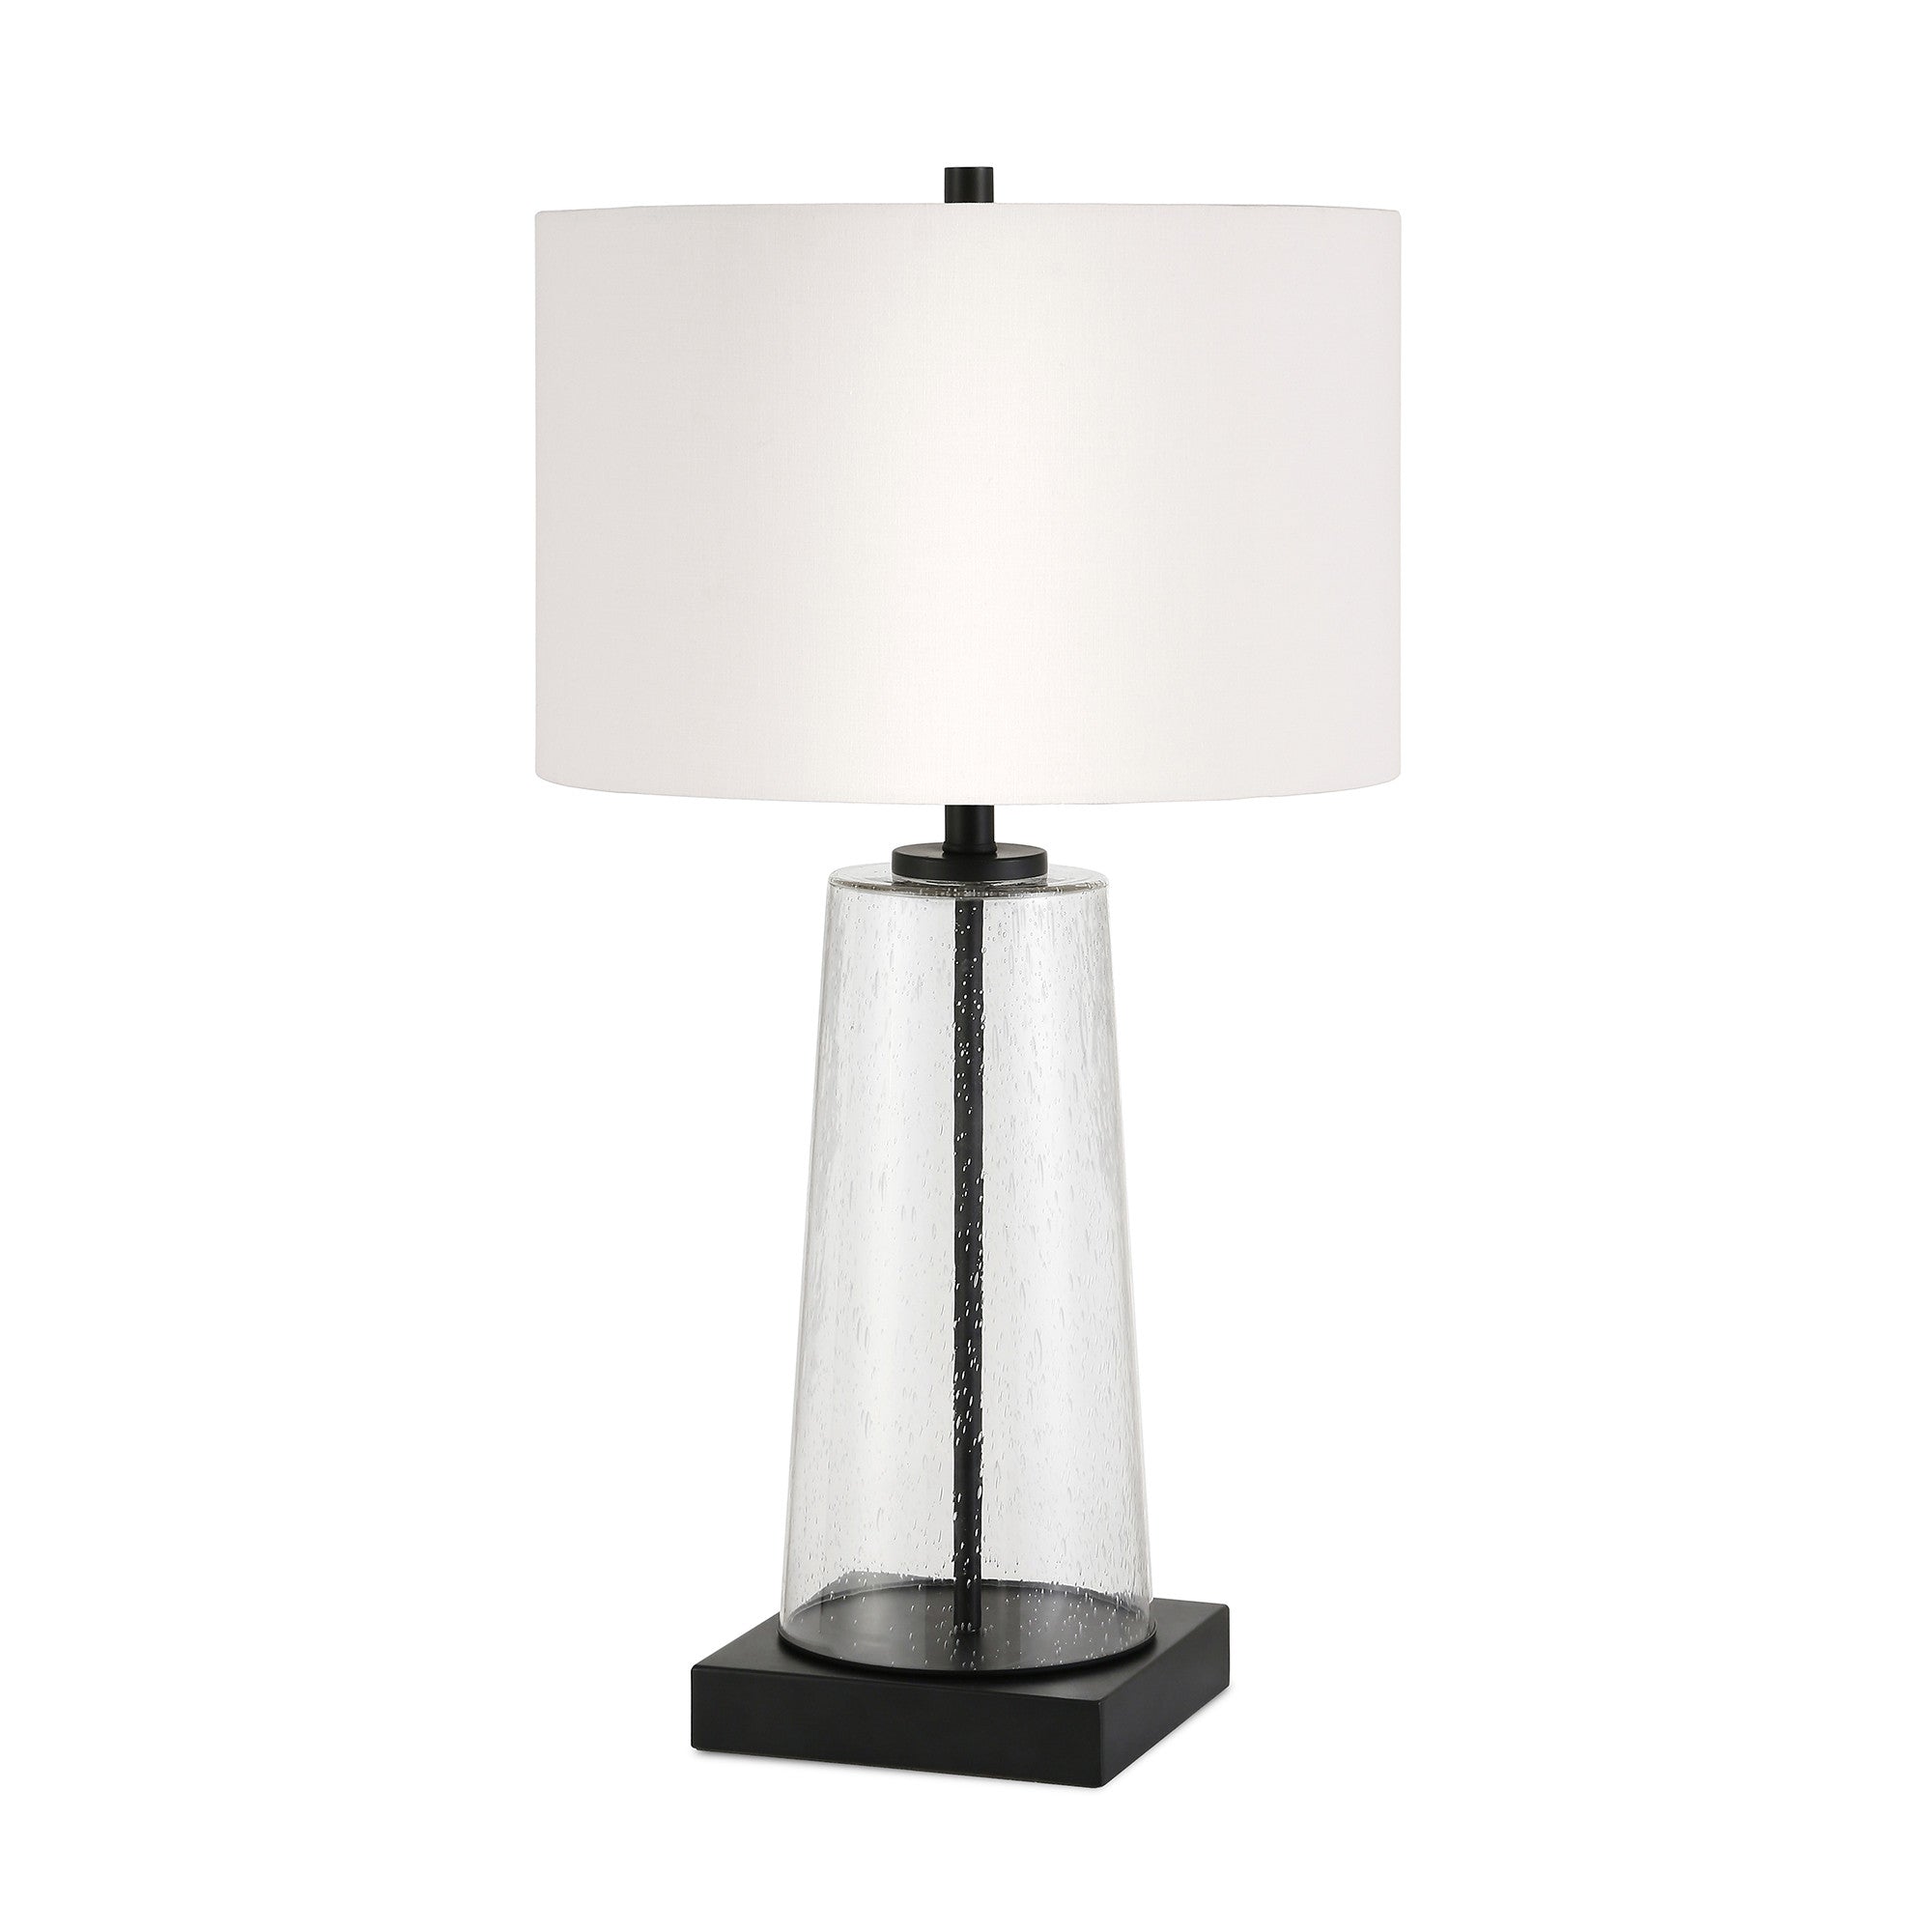 27" Black Glass Table Lamp With White Drum Shade